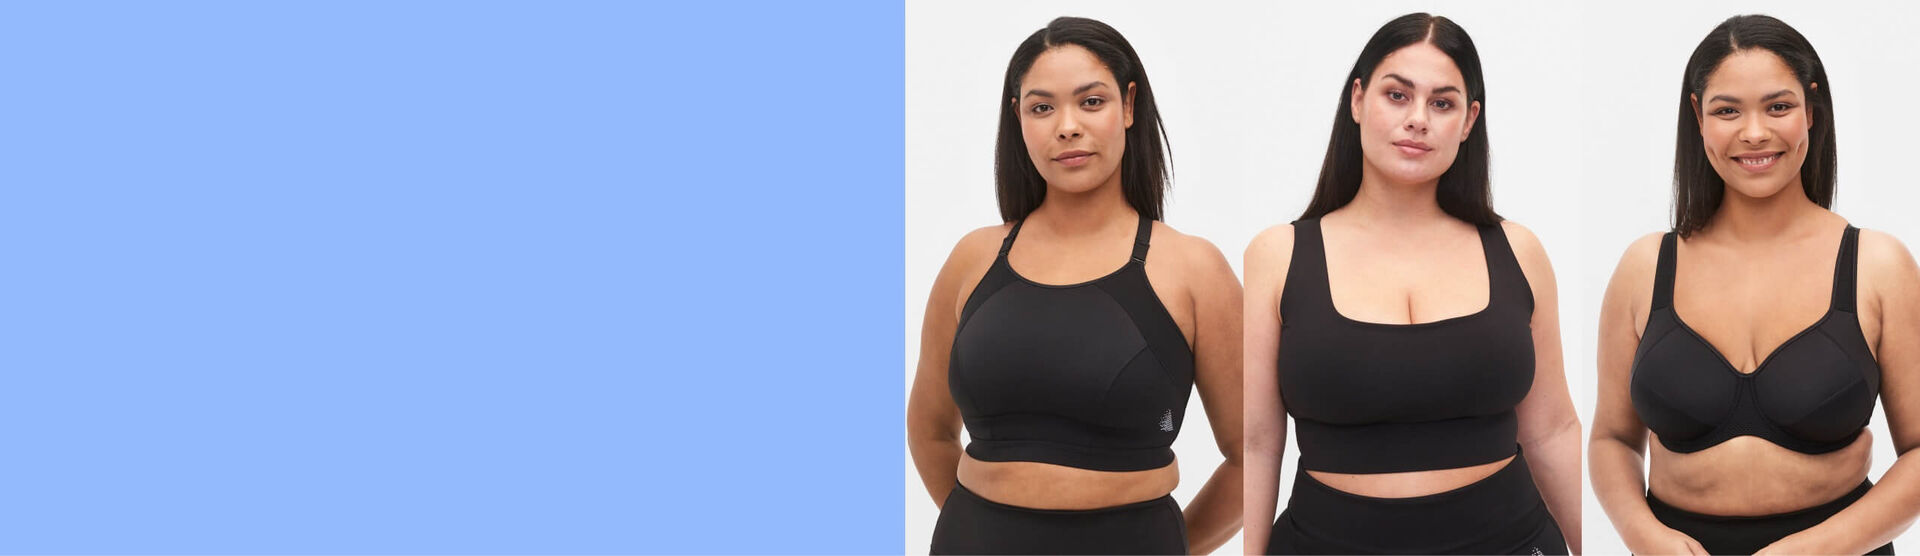 The Best Sports Bras for Big Boobs - Curvy